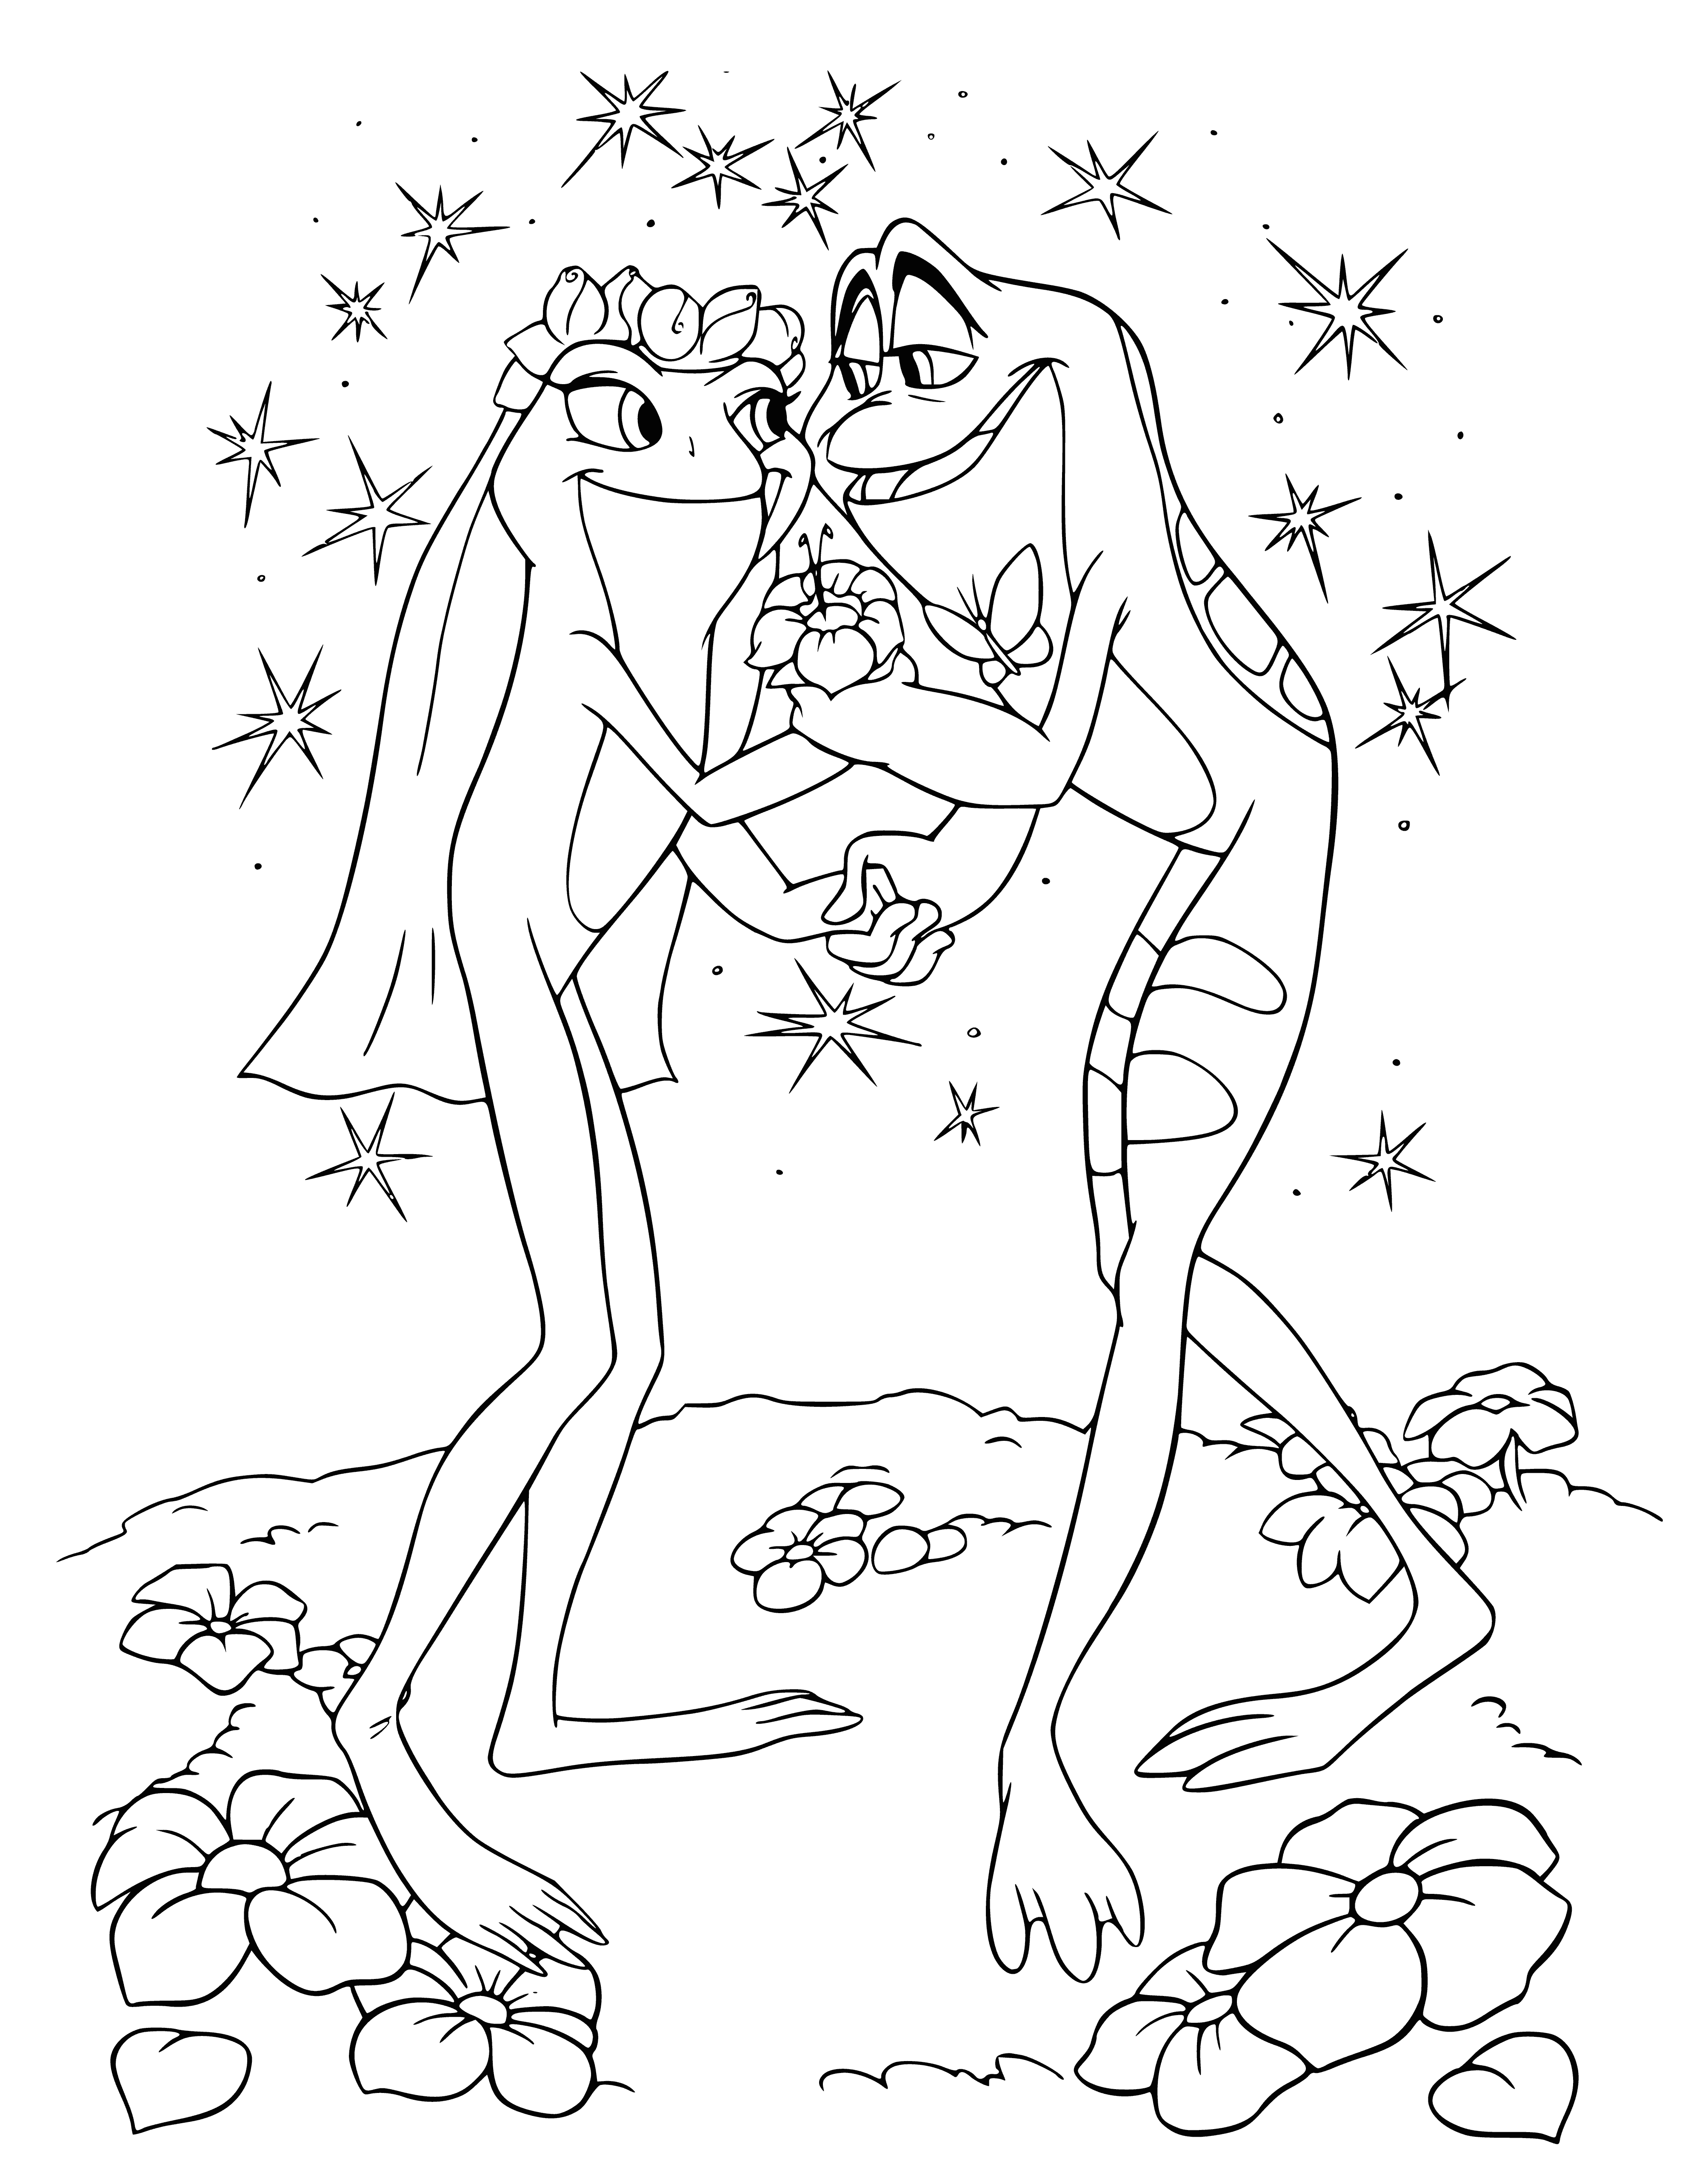 coloring page: Tiana and Navin, with brown skin and black hair, stand smiling and look at each other; she's in a green dress, and he in a red shirt and blue pants.